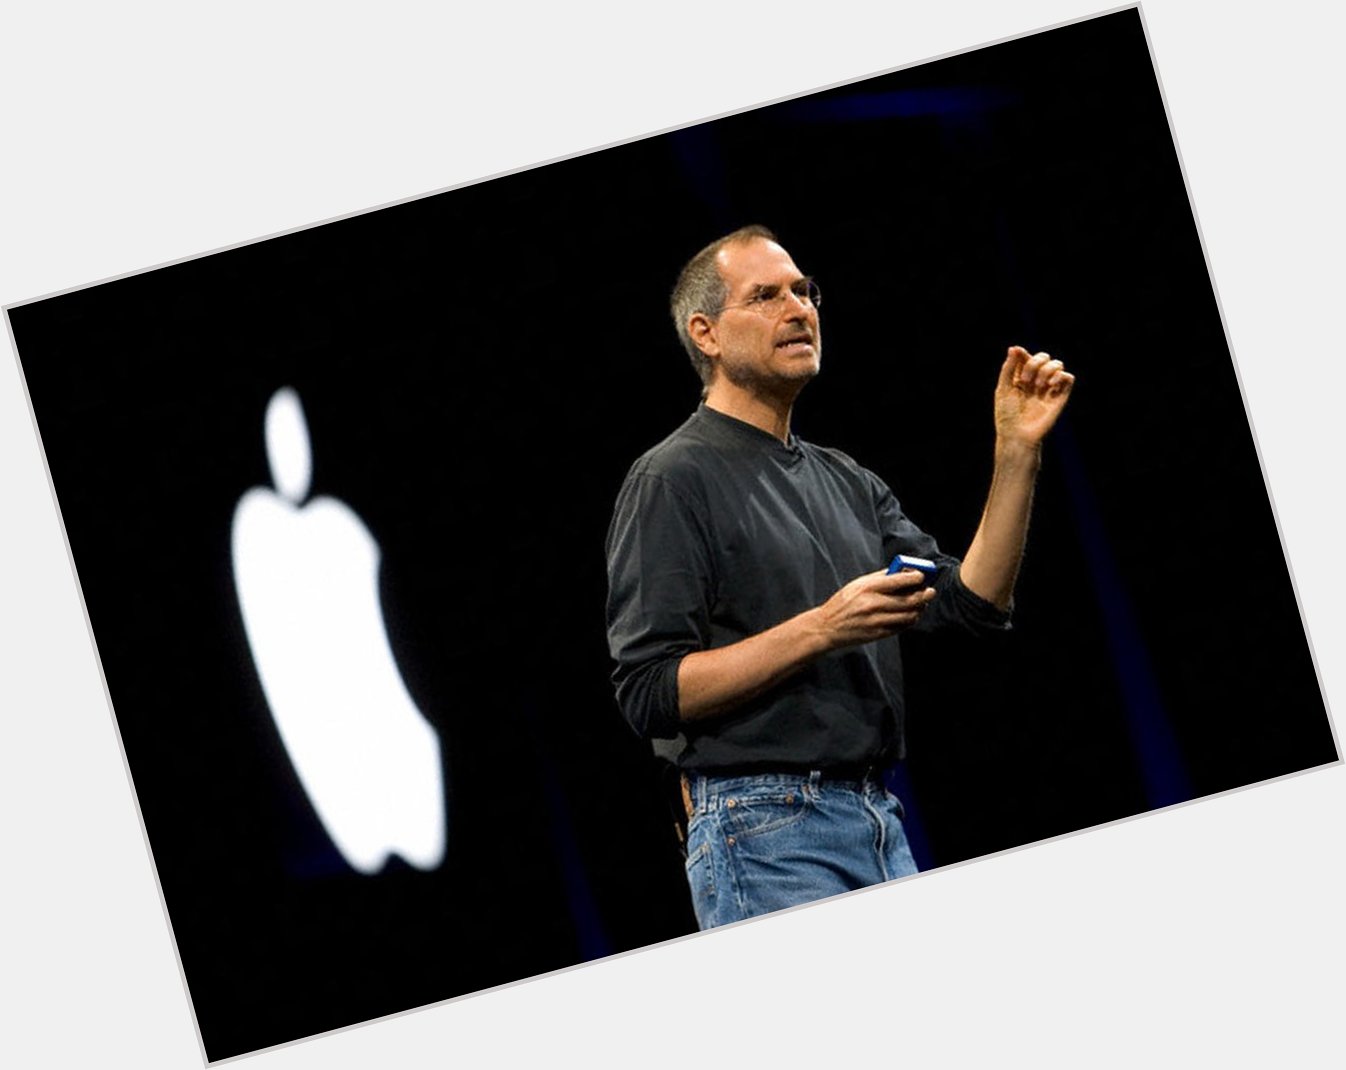 Happy Birthday to Steve Jobs, who would have turned 62 today! 